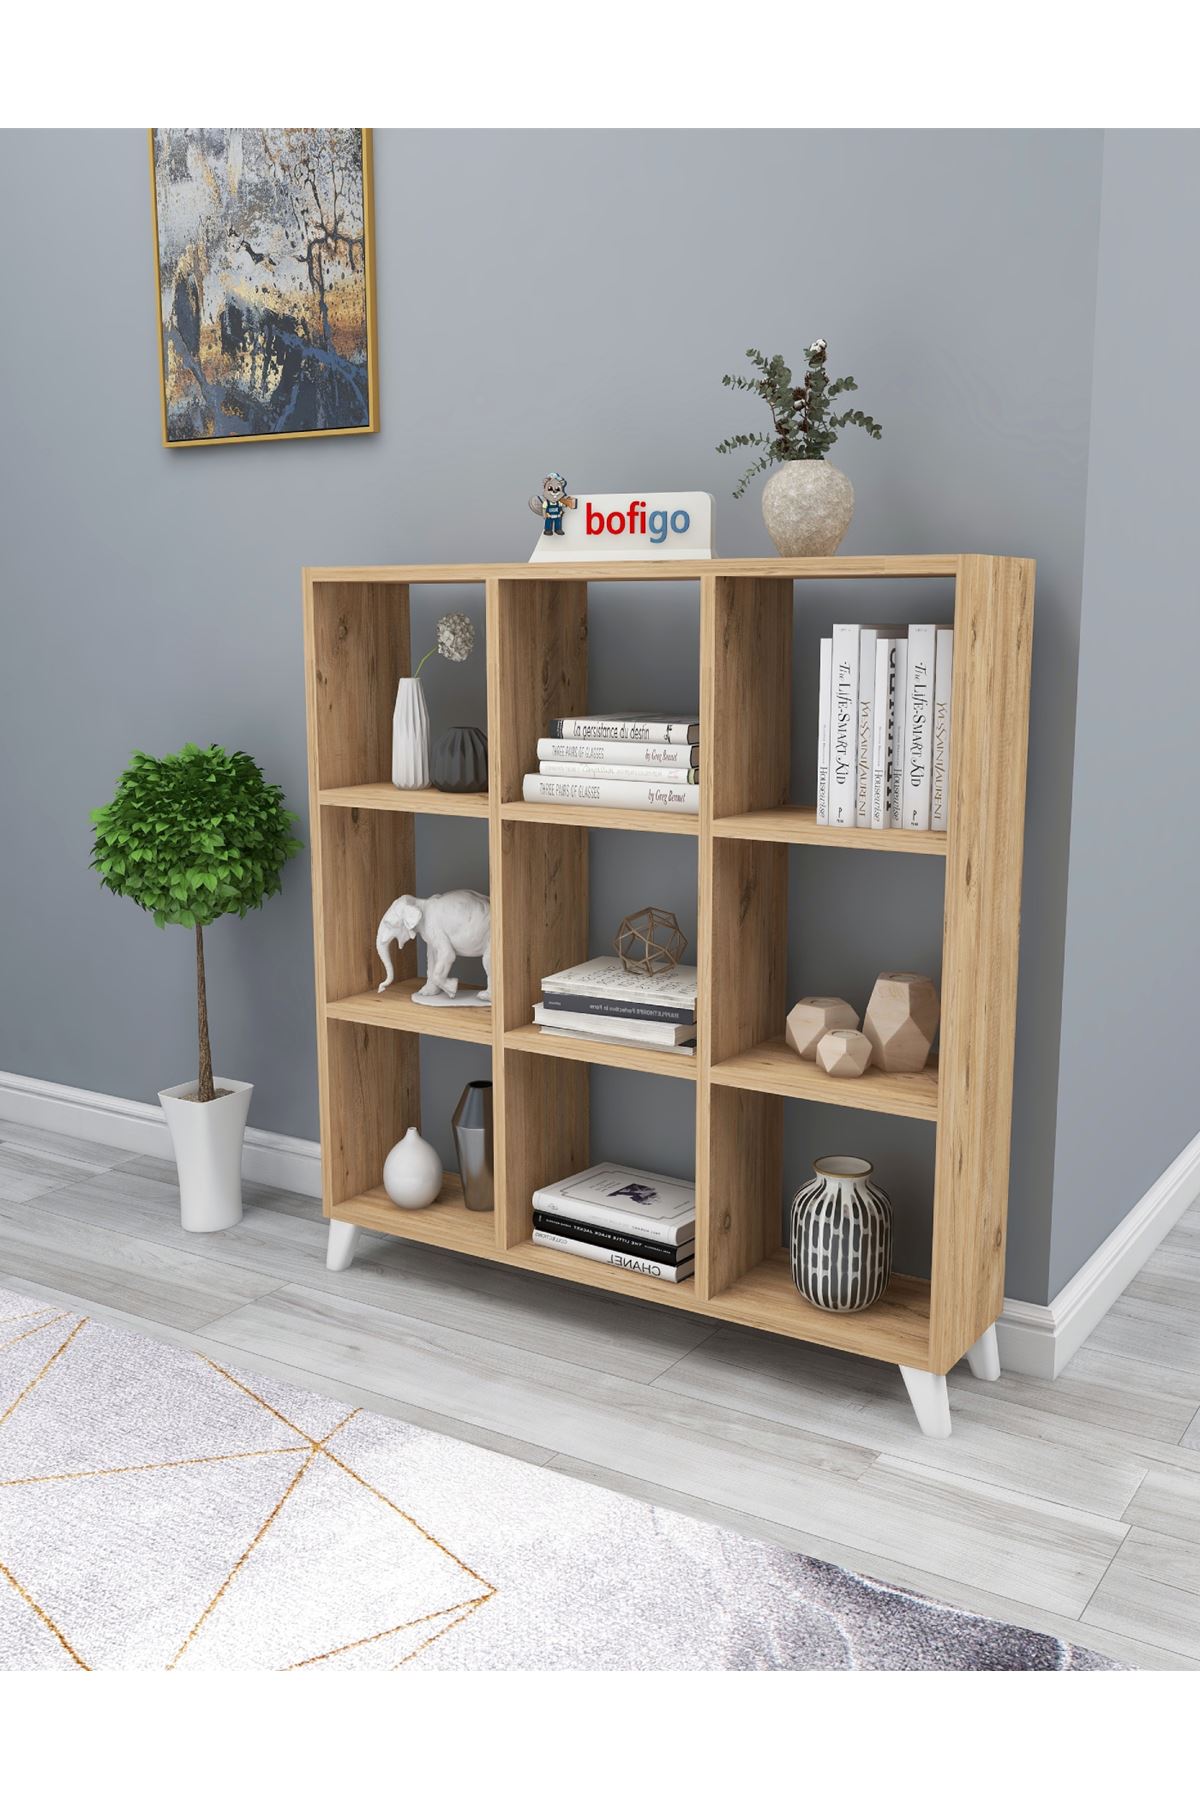 Bofigo Cube Bookshelf with 9 Sections and Shelves Square Bookcase Library Pine